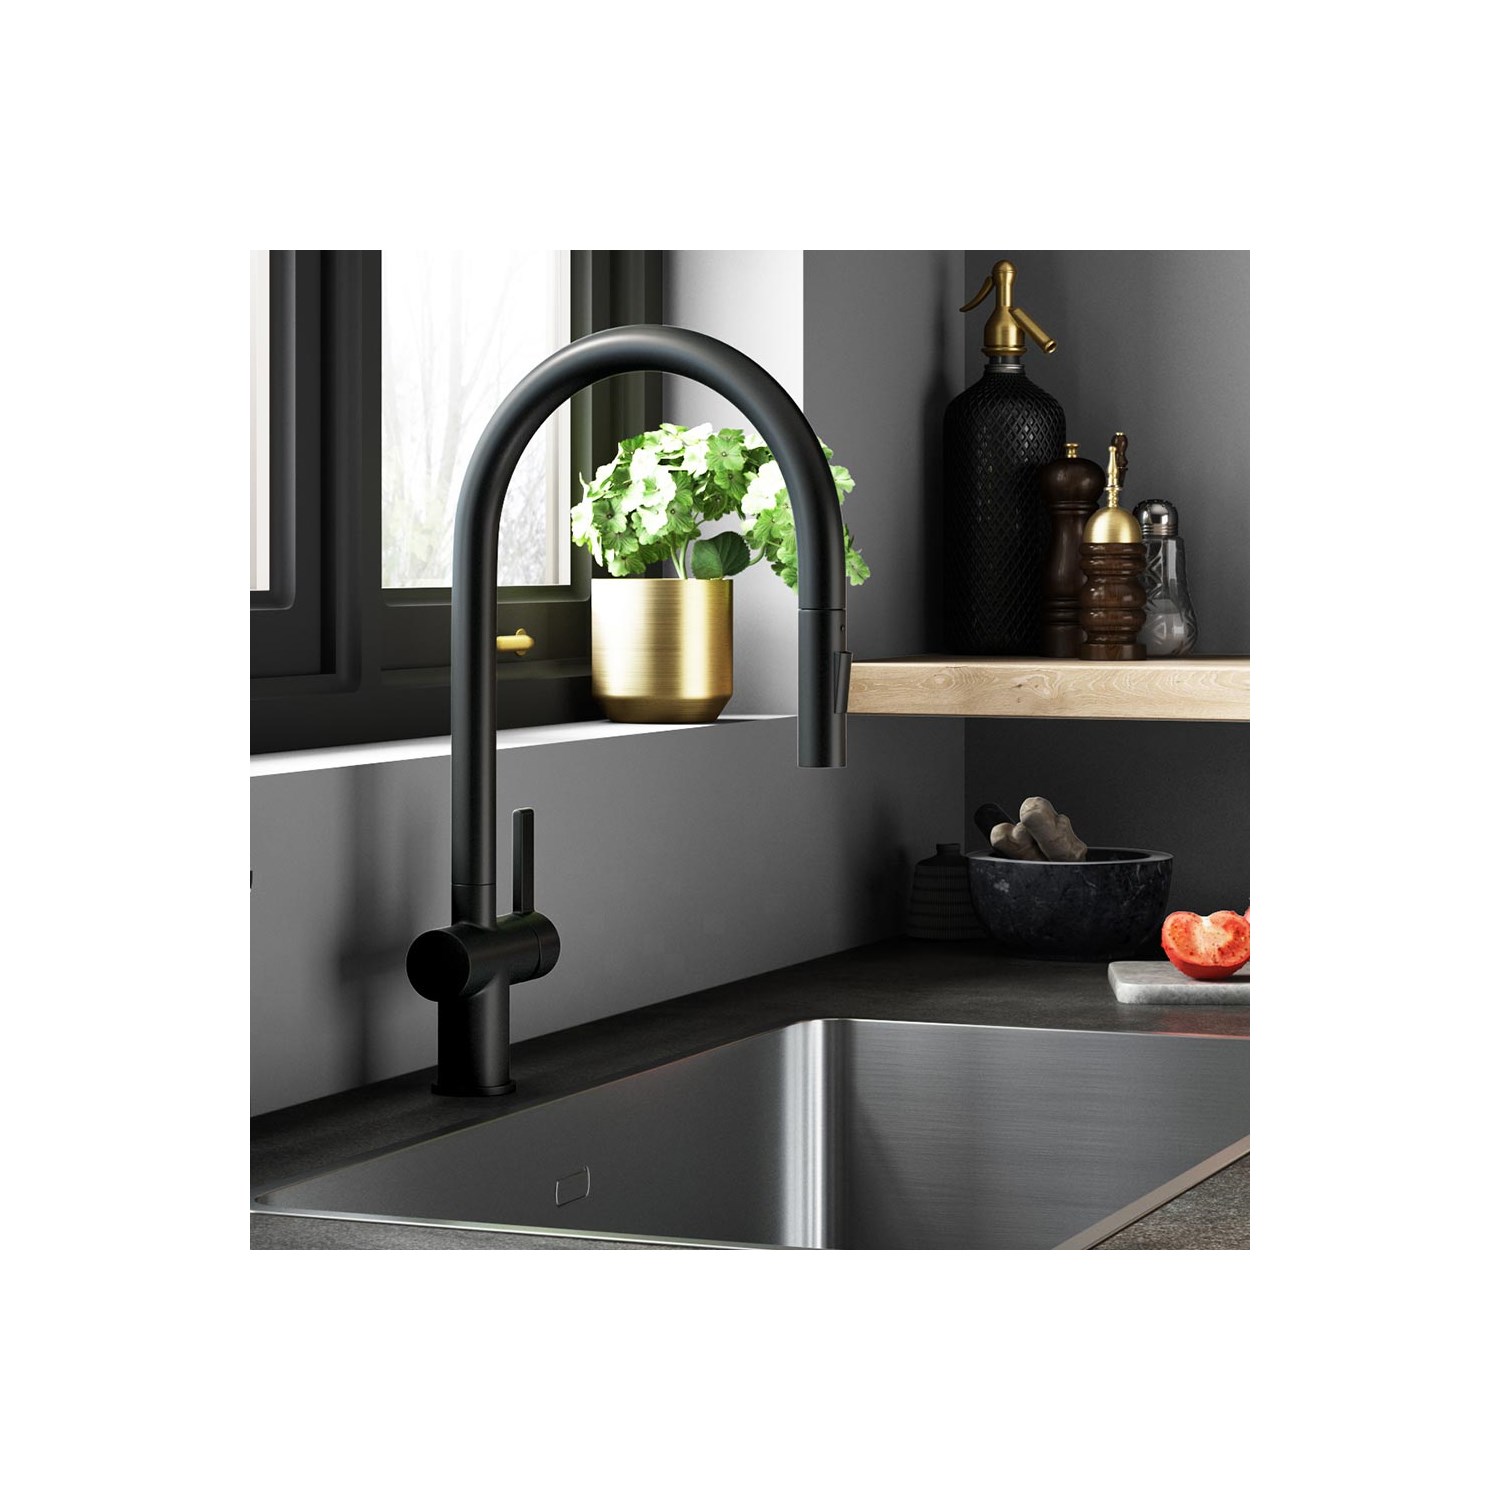 Details about   Matt Black Monobloc Kitchen Sink Mixer Tap with Pull Out Hose Spray Single Lever 